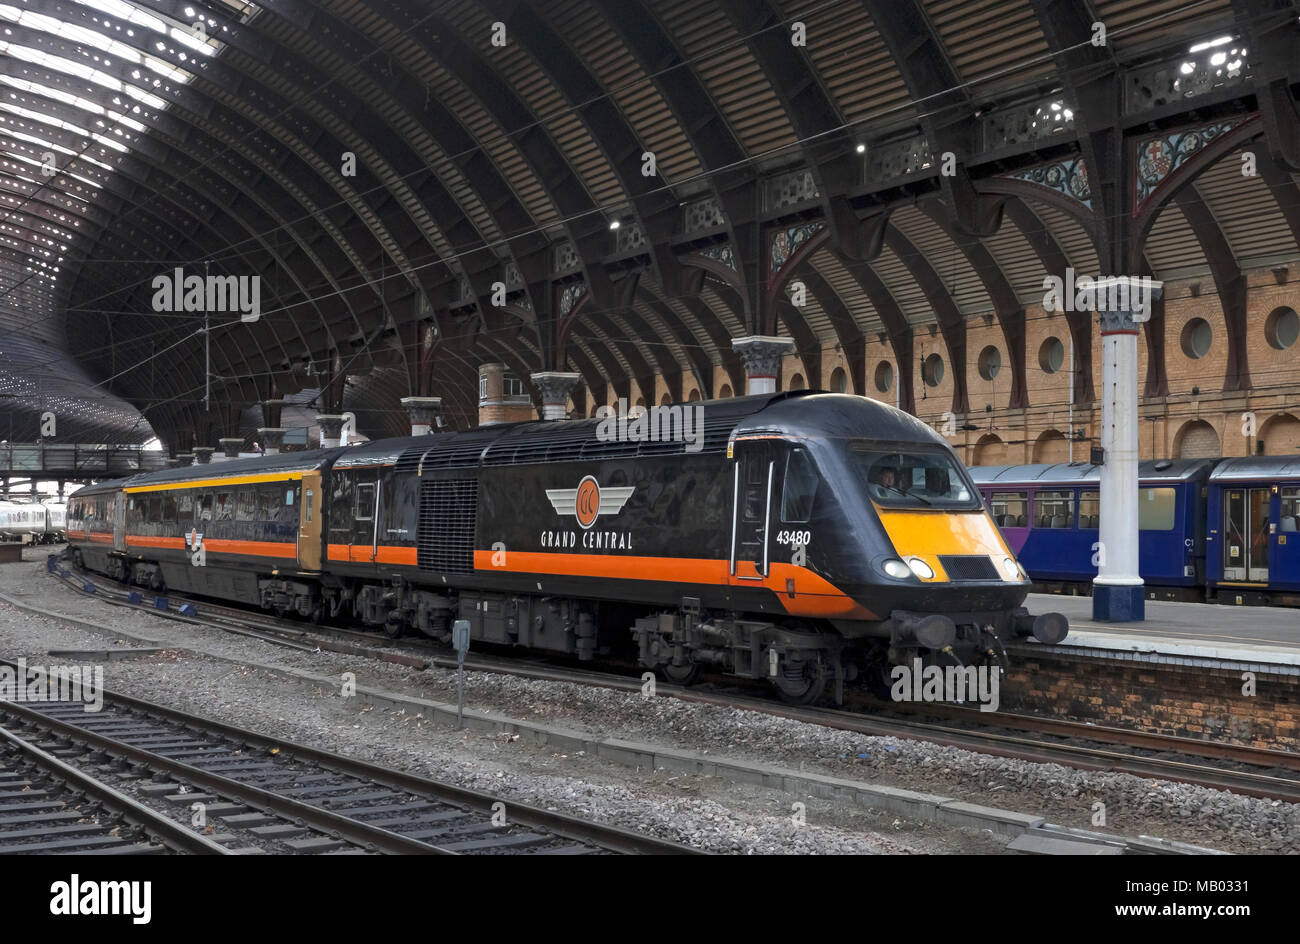 Grand Central high speed passenger train waiting at the station. Stock Photo